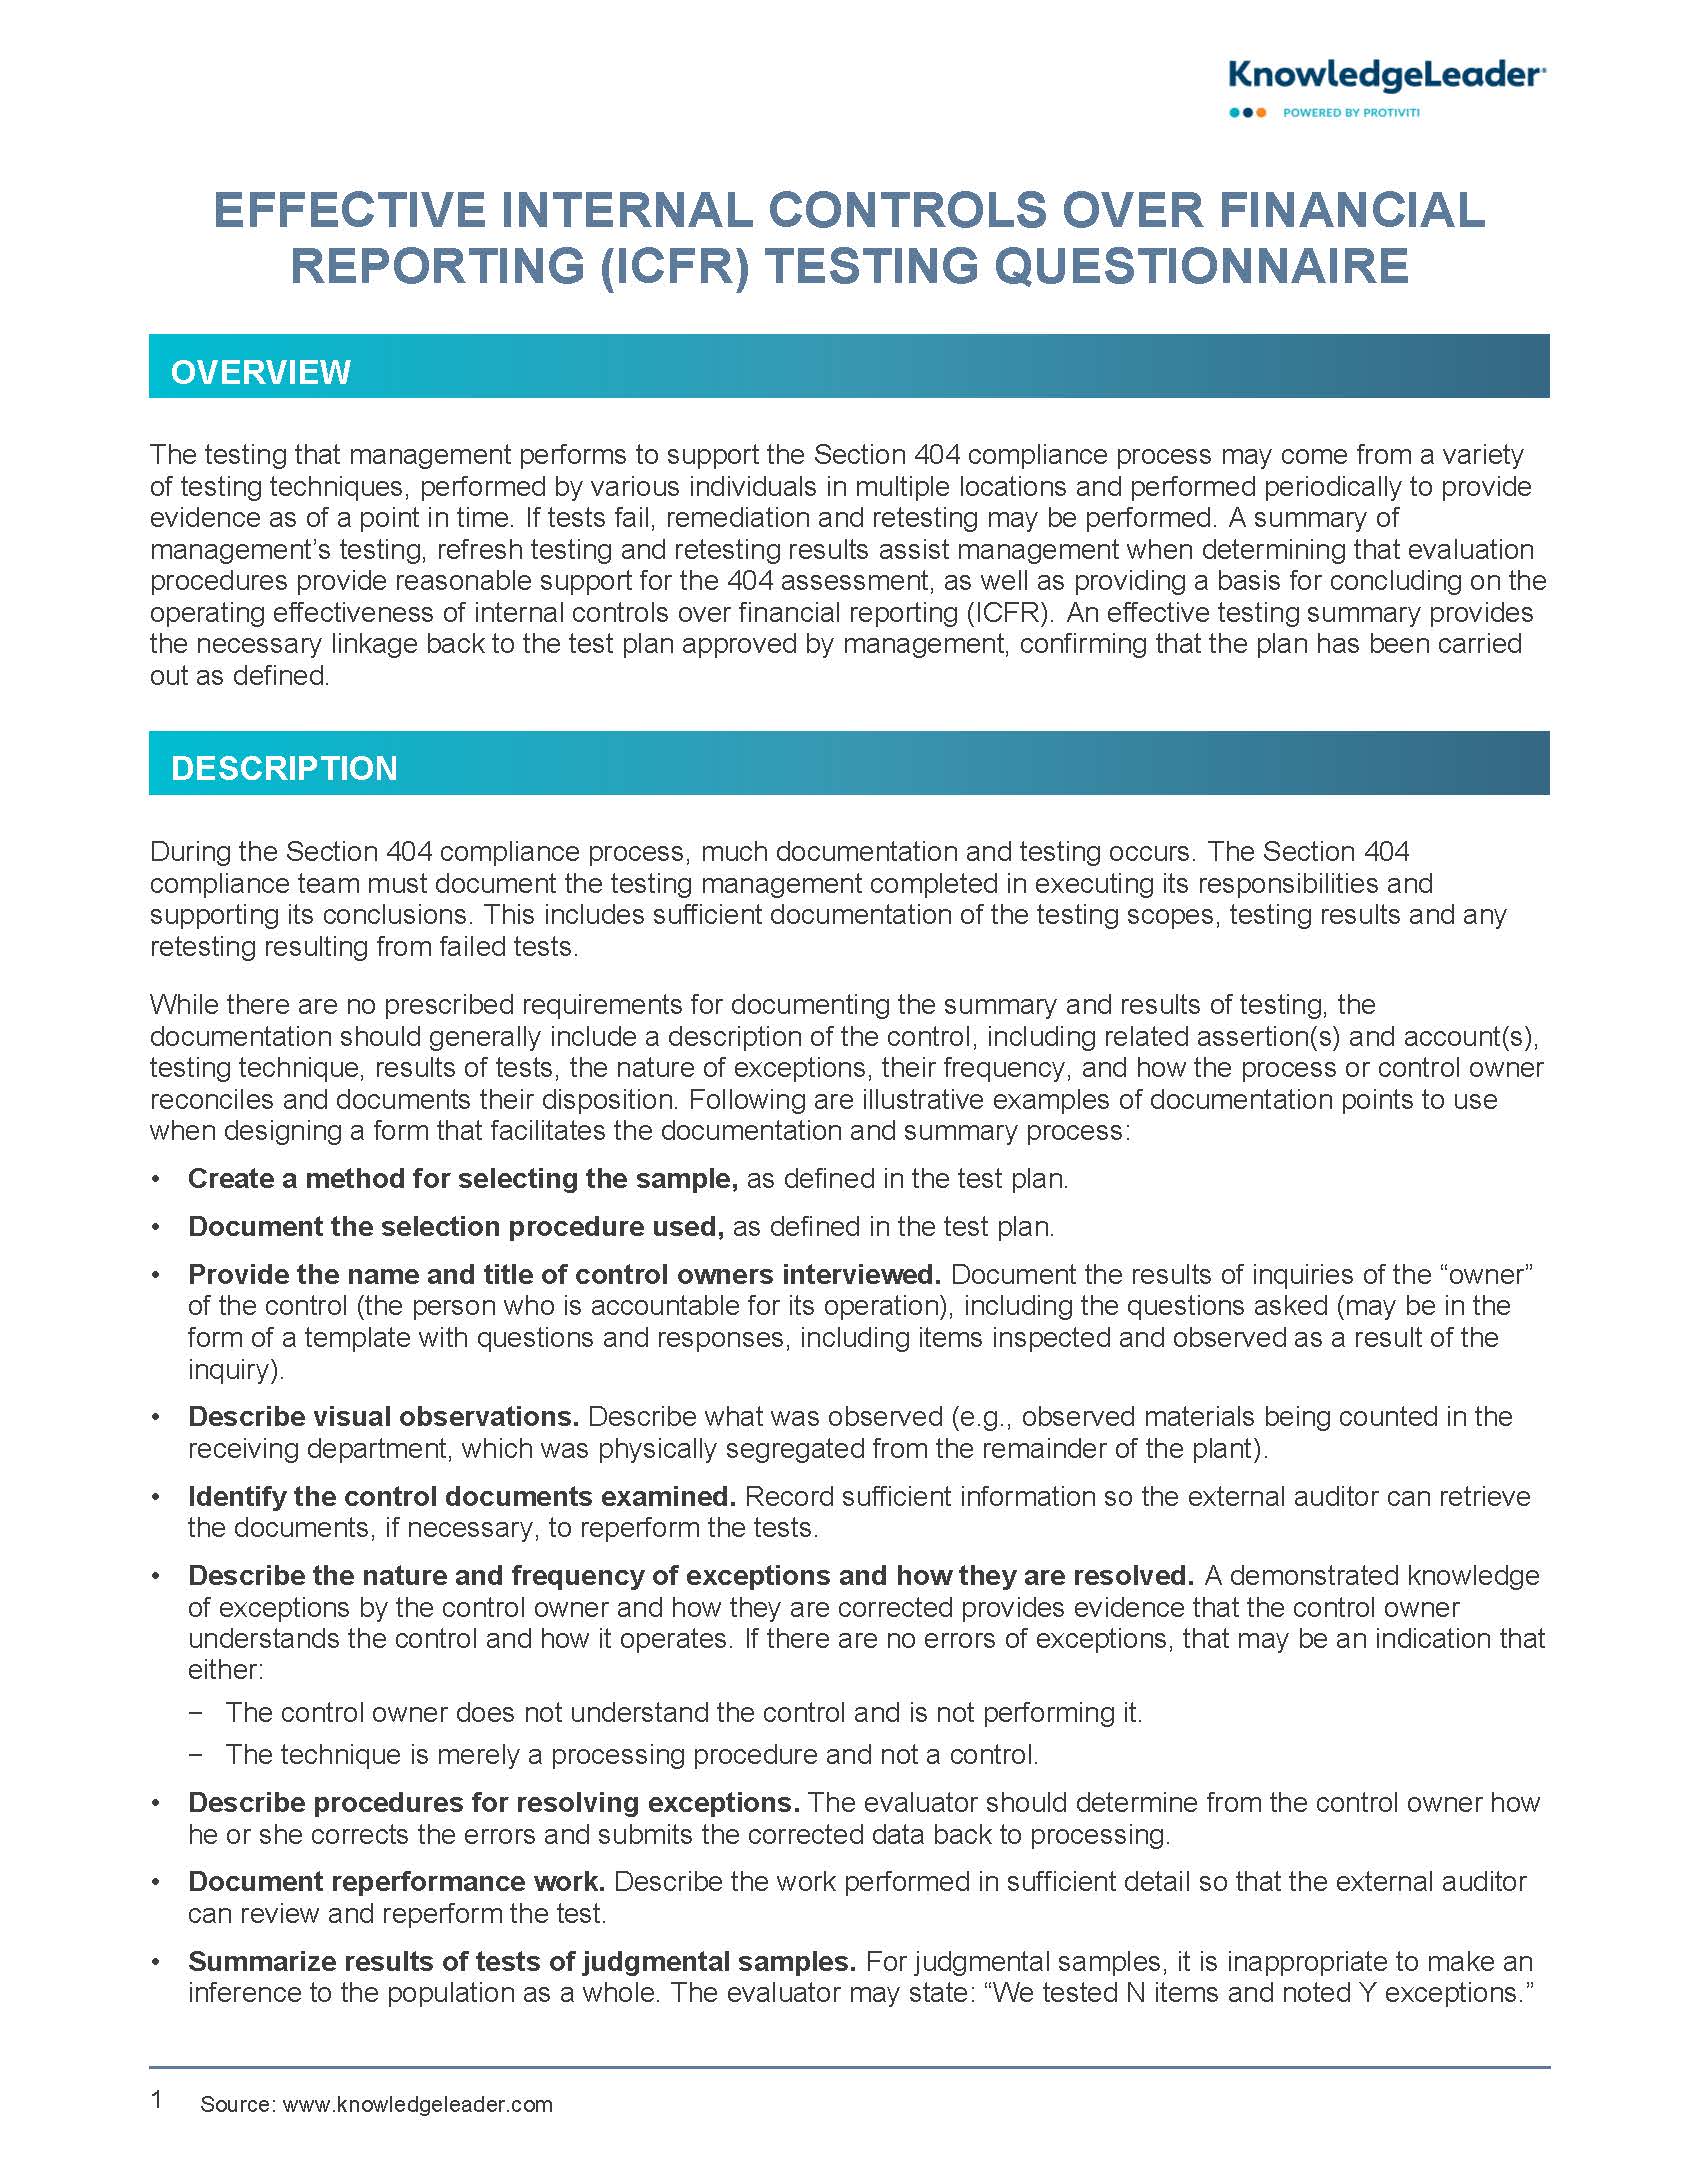 Effective Internal Controls Over Financial Reporting (ICFR) Testing Questionnaire